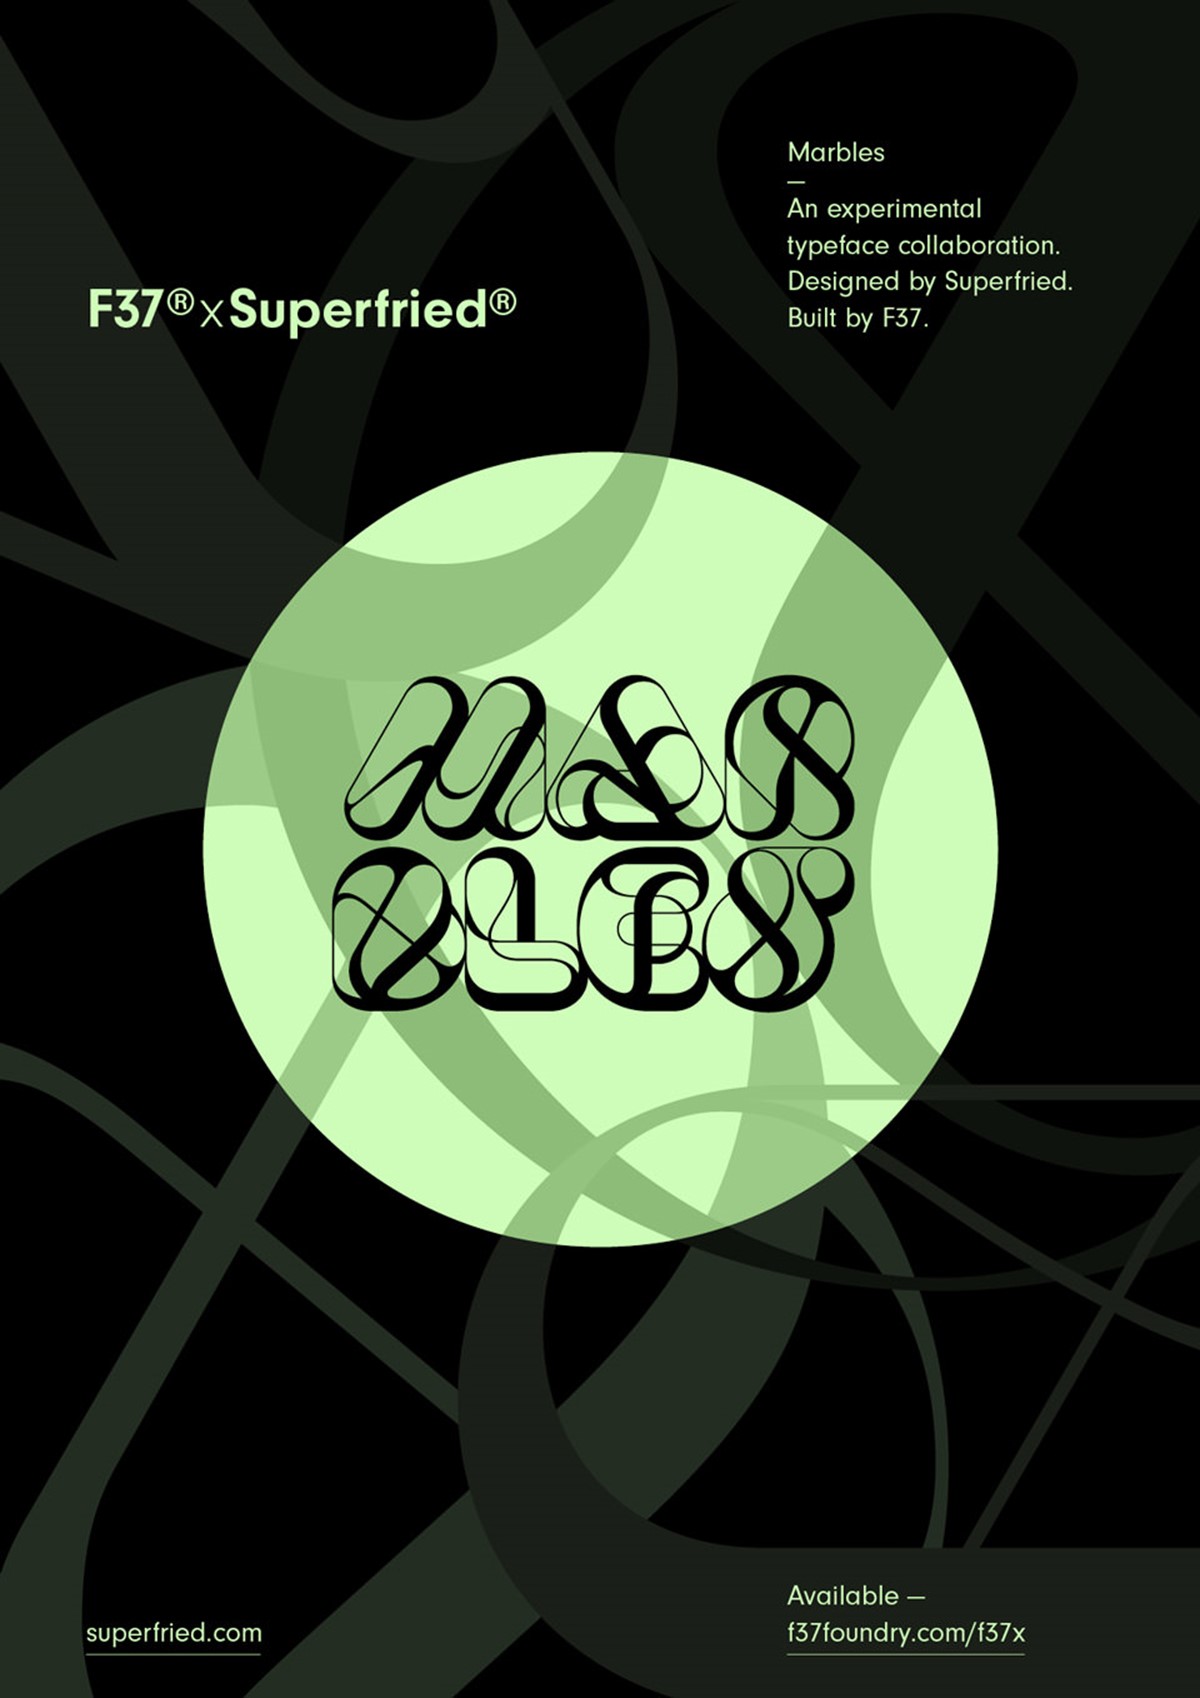 Marbles – An experimental typeface collaboration. Designed by Superfried. Built by F37. Manchester. Green logo poster.